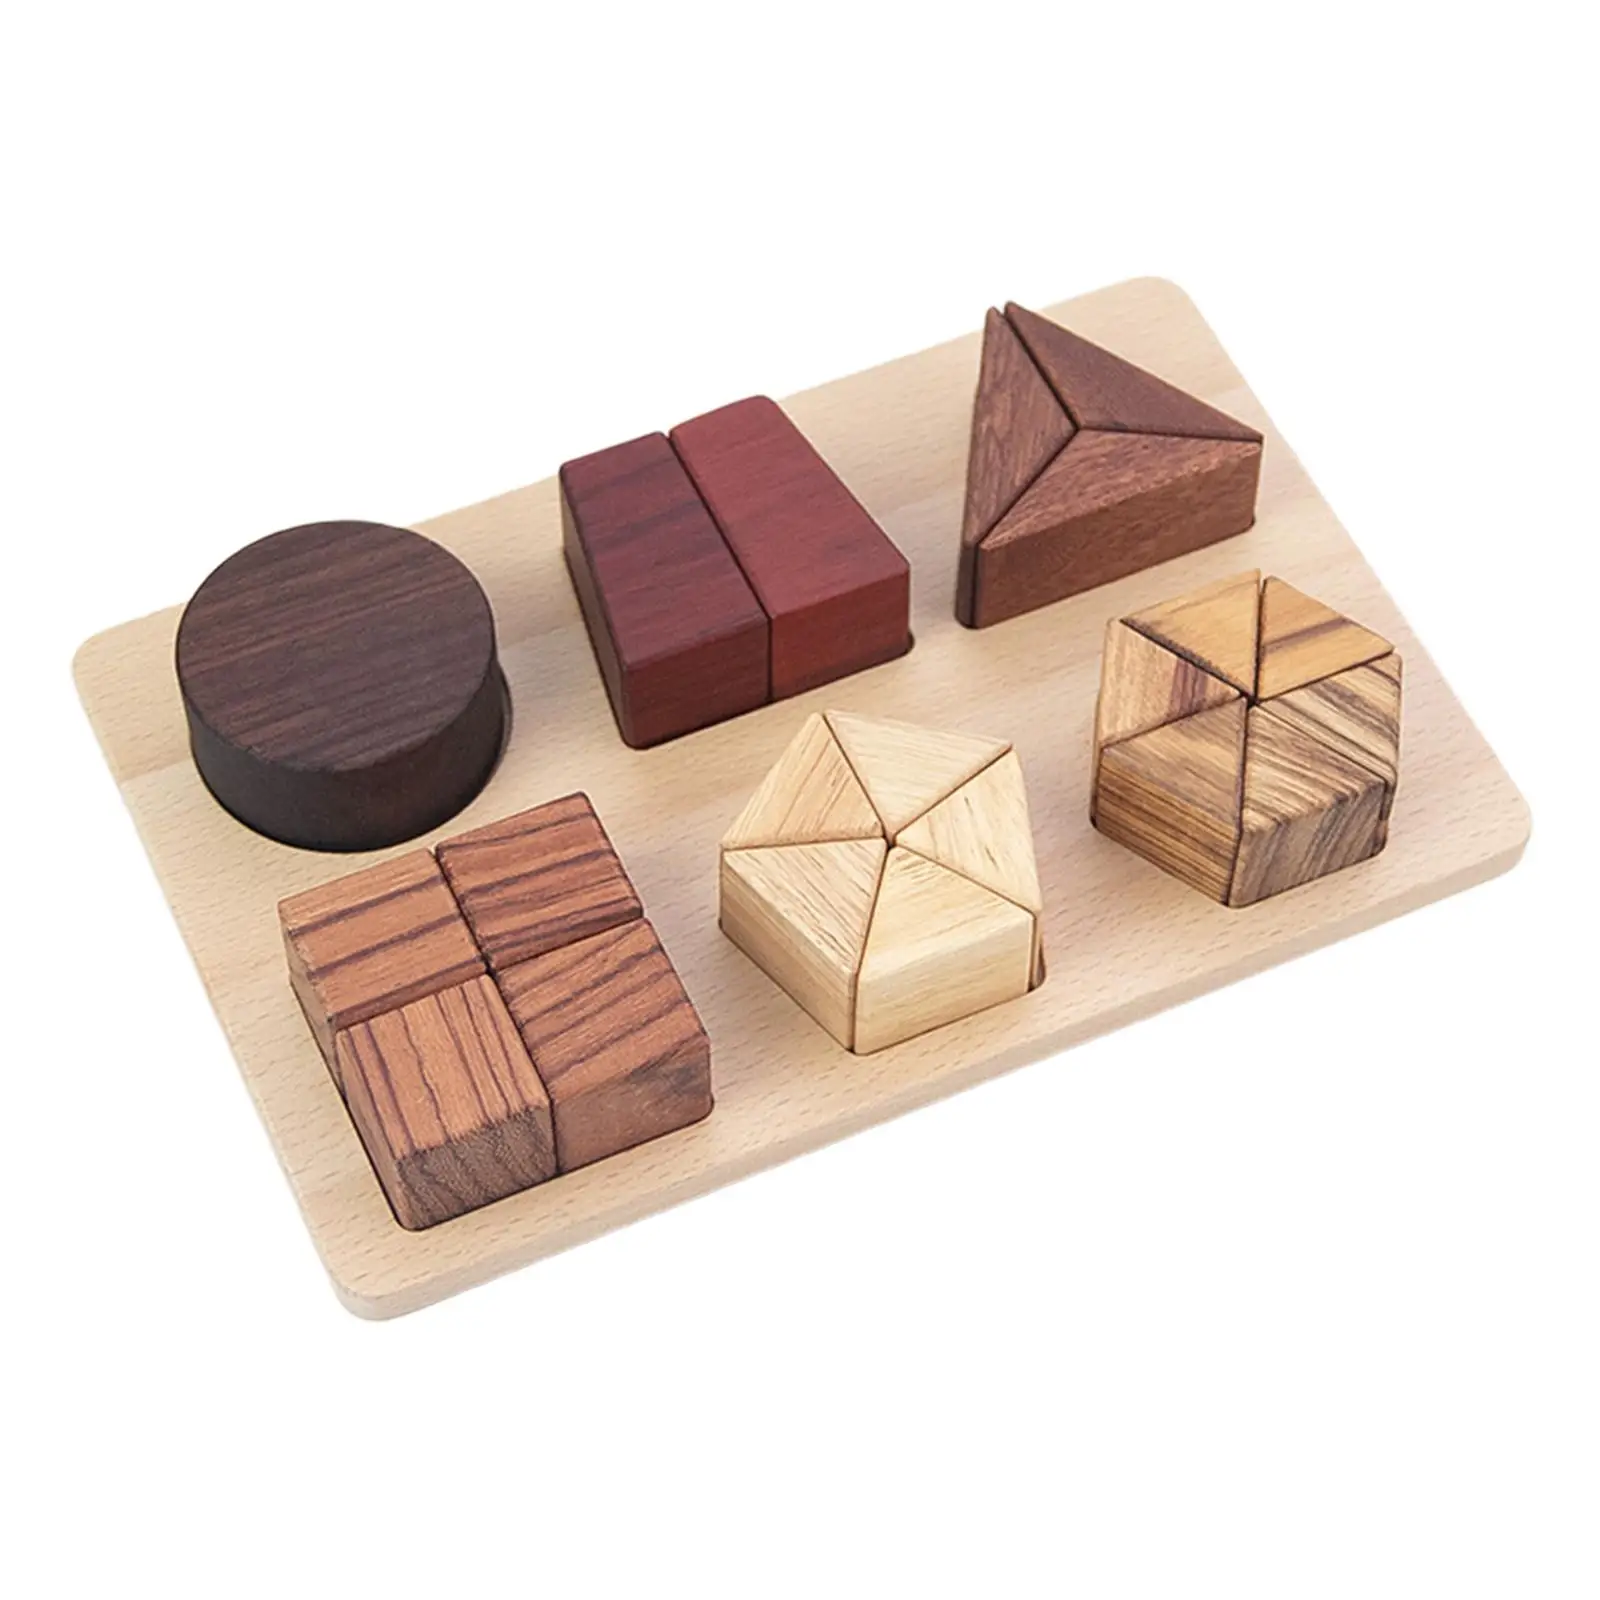 Wooden Shape Sorter Geometric Shape Sorting Toy for Boys 3 4 5 6 Years Old